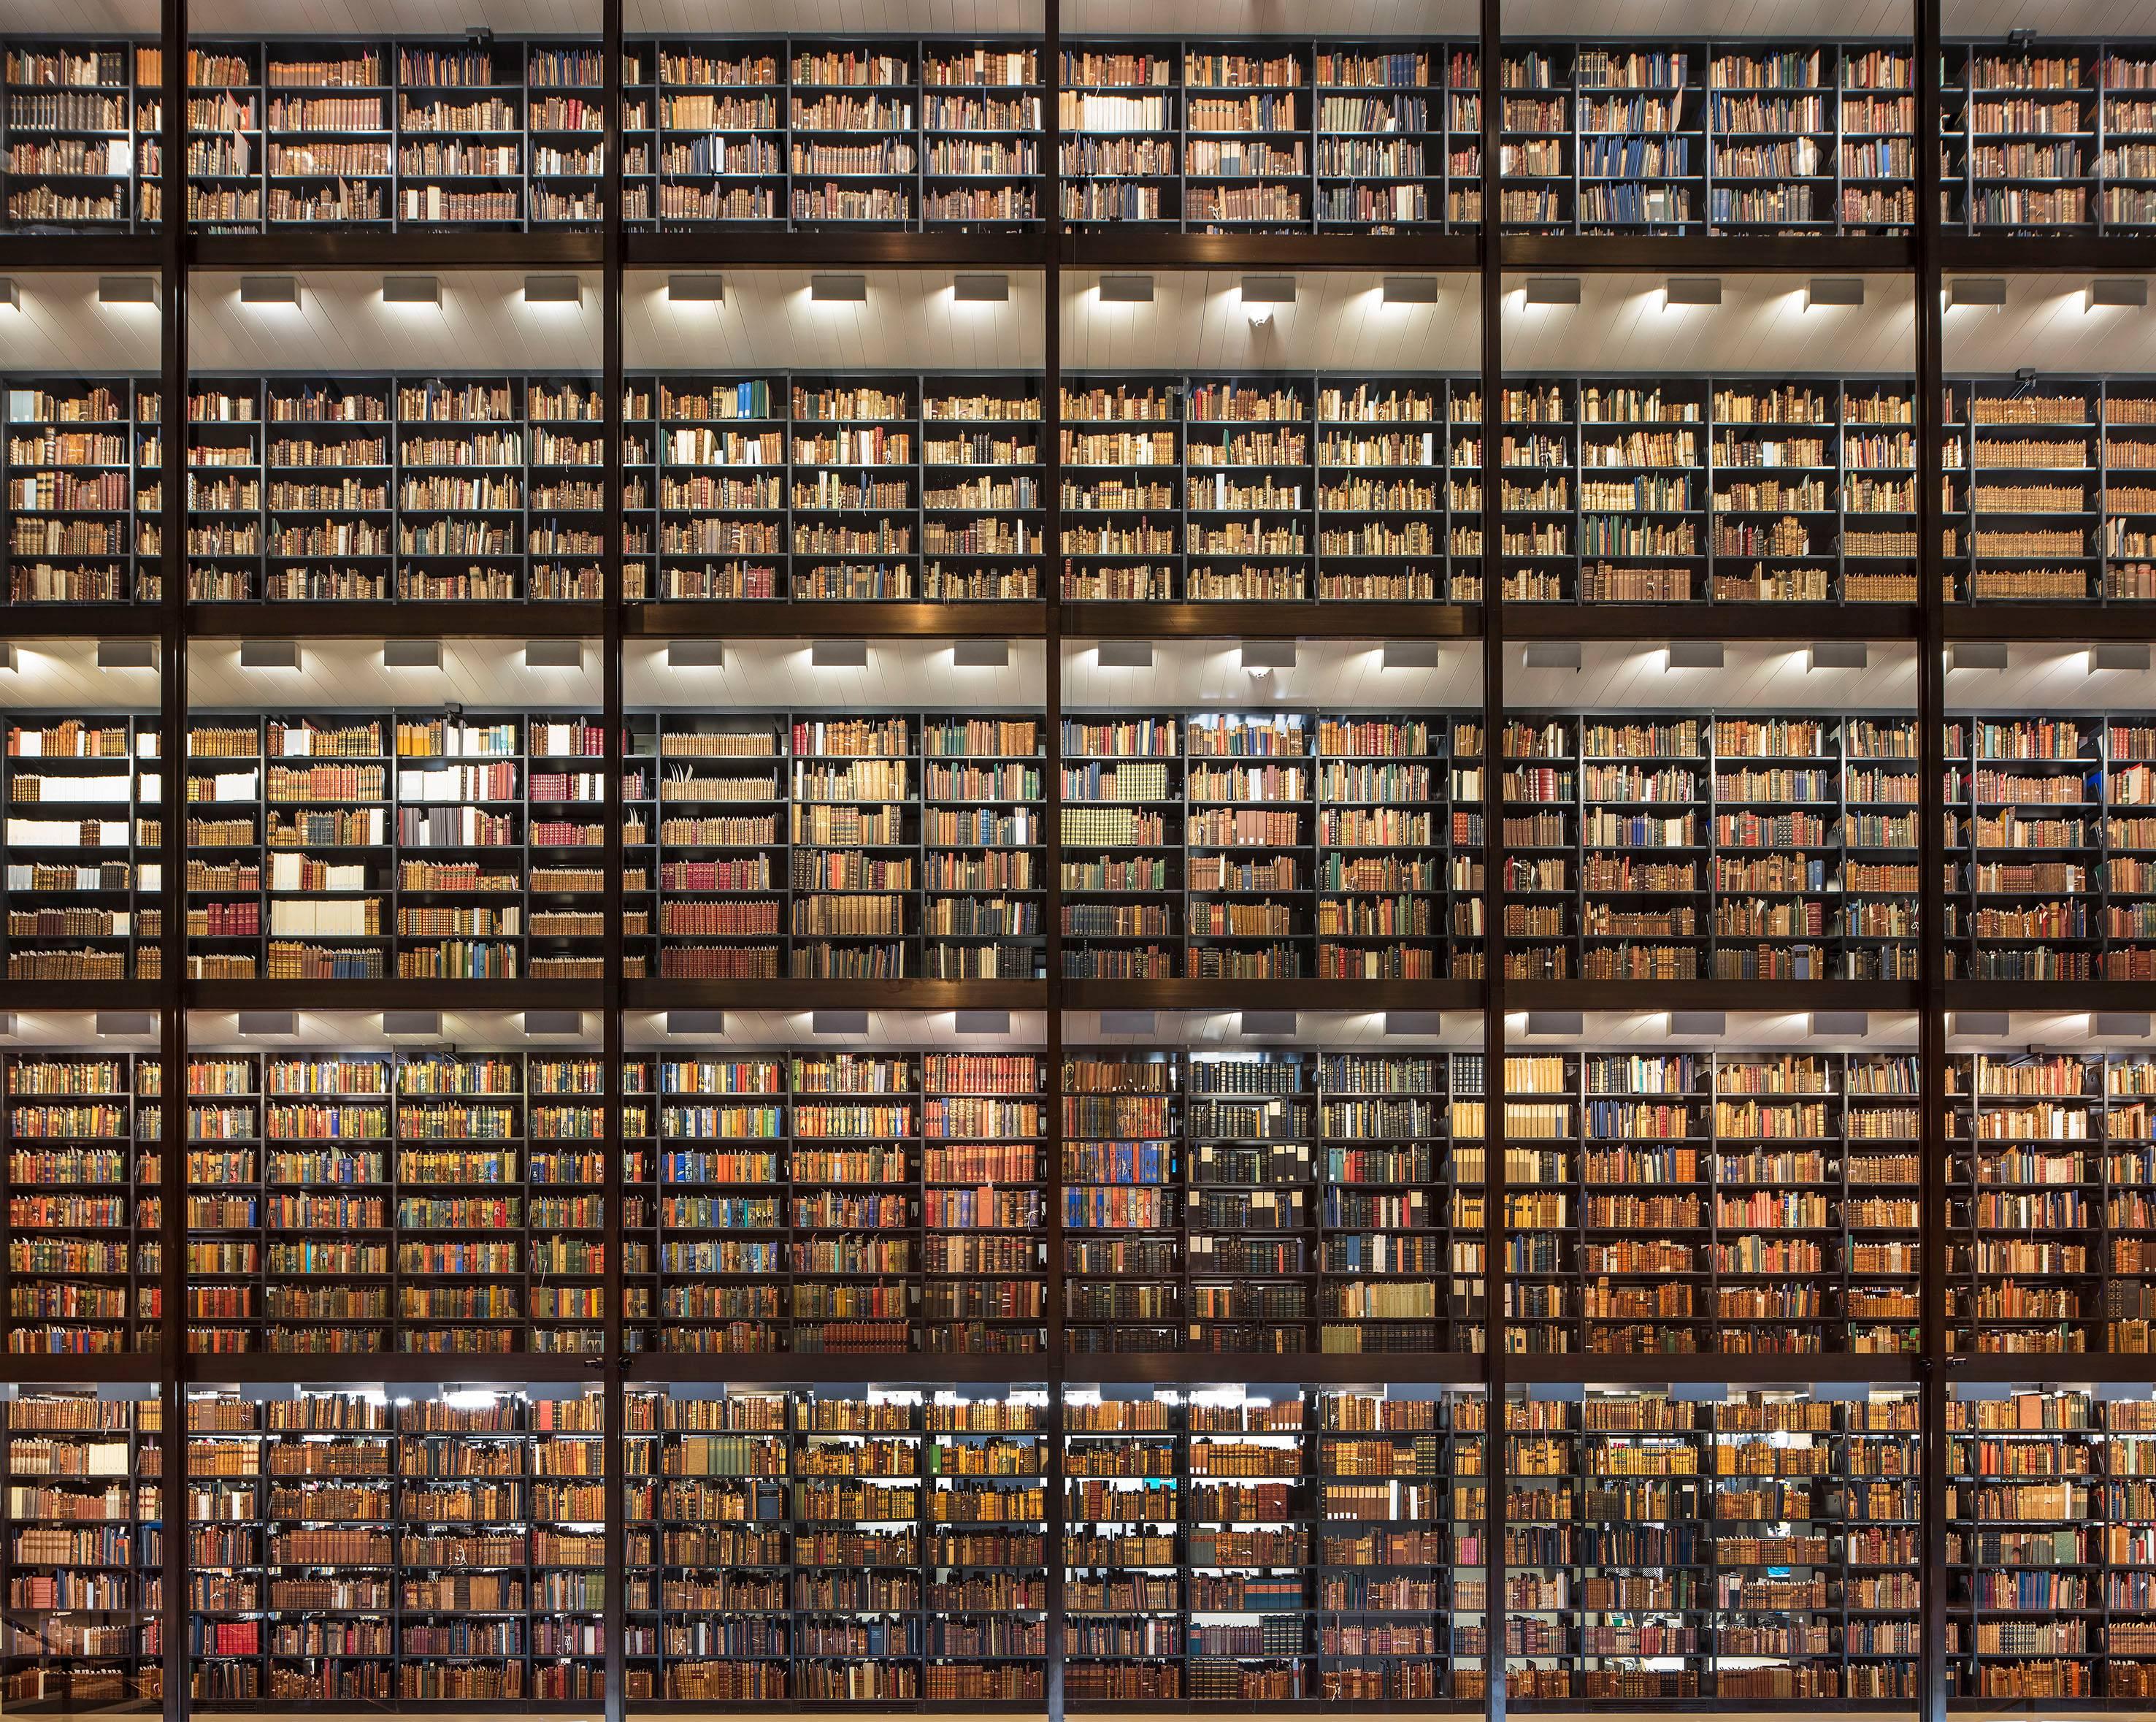 Reinhard Görner Landscape Photograph - Shining Wall of Books  //  Beinecke Rare Books and Manuscript Library, New Haven